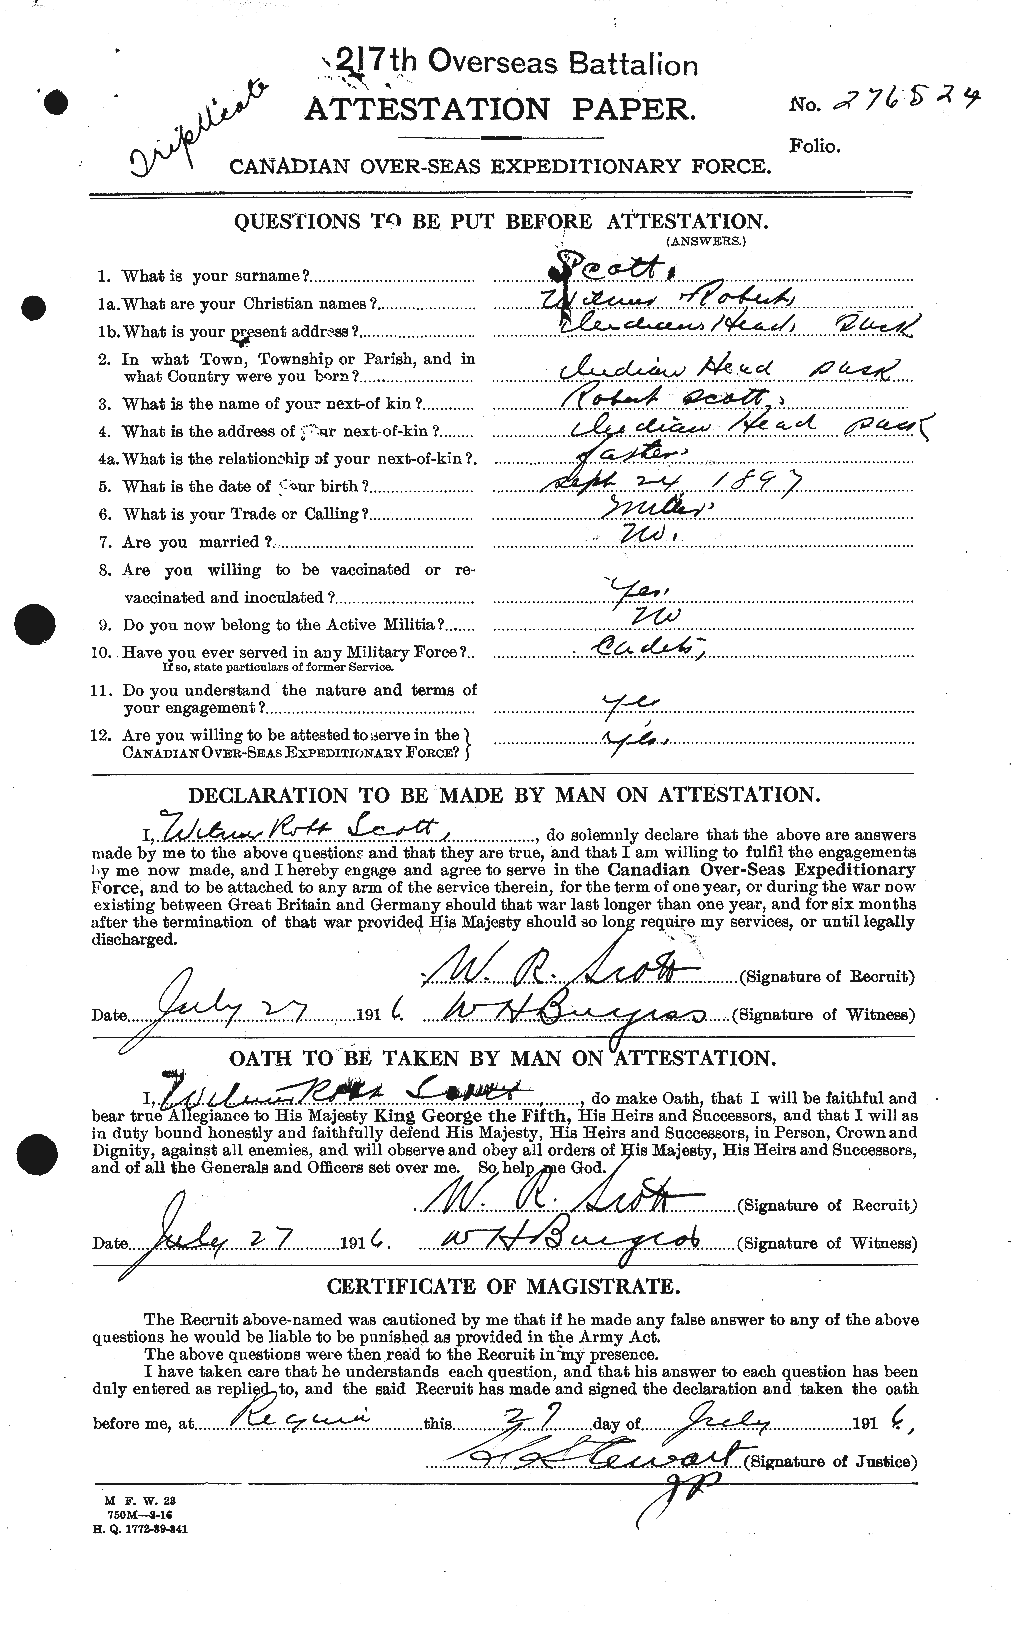 Personnel Records of the First World War - CEF 087247a